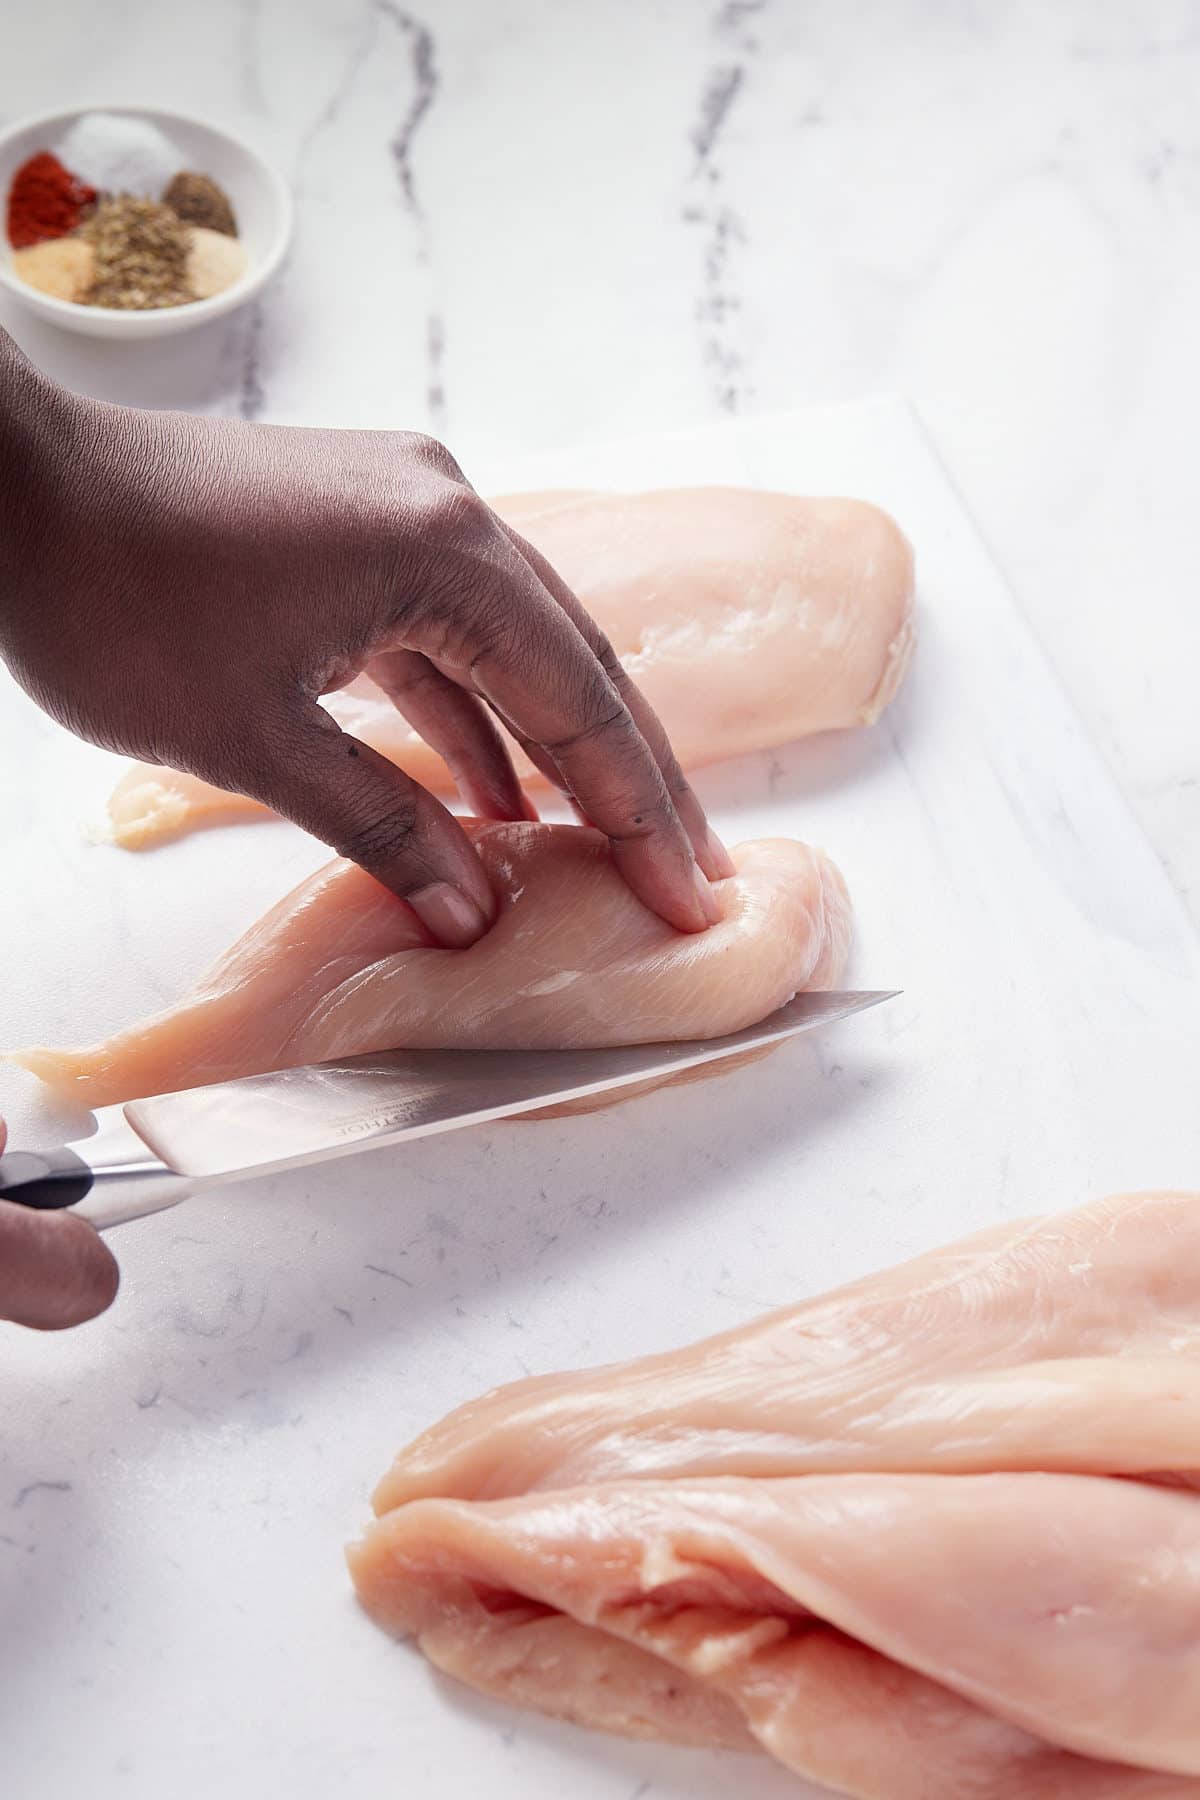 Cutting the chicken breasts in half.